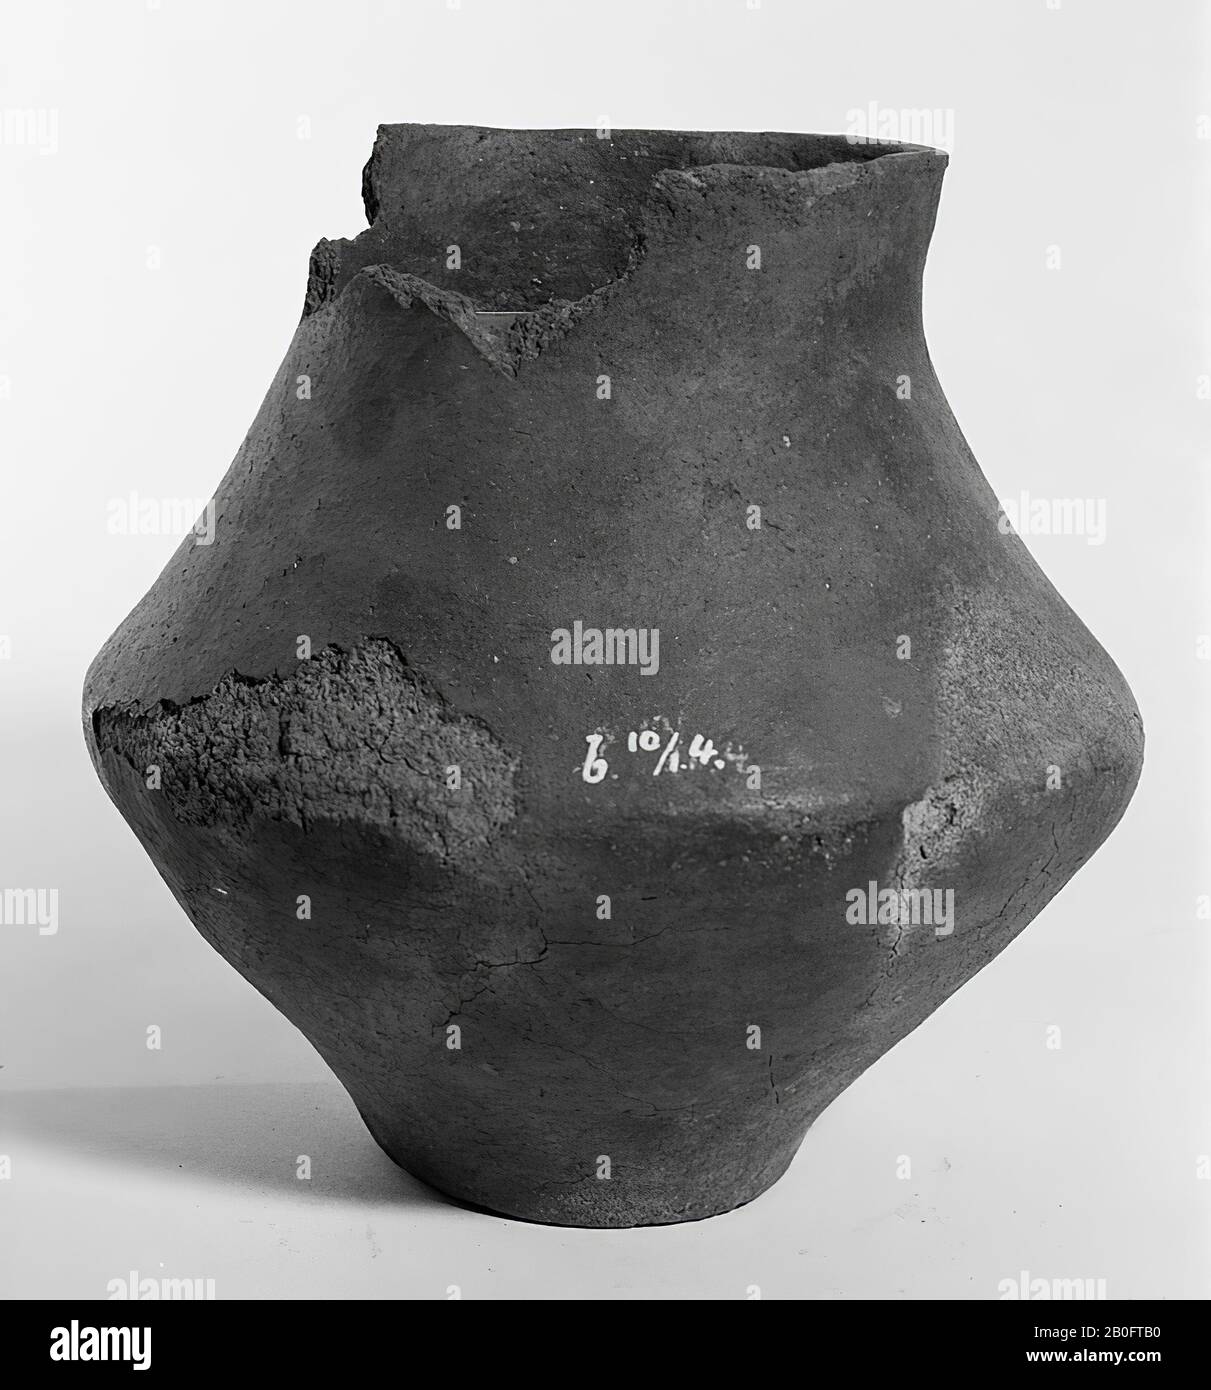 Urn of earthenware, part of which is missing. Cracks, surface cracks, surface damage. Contains cremated residues, urn, earthenware, h: 17 cm, diam: 17 cm, prehistory -1200 Stock Photo